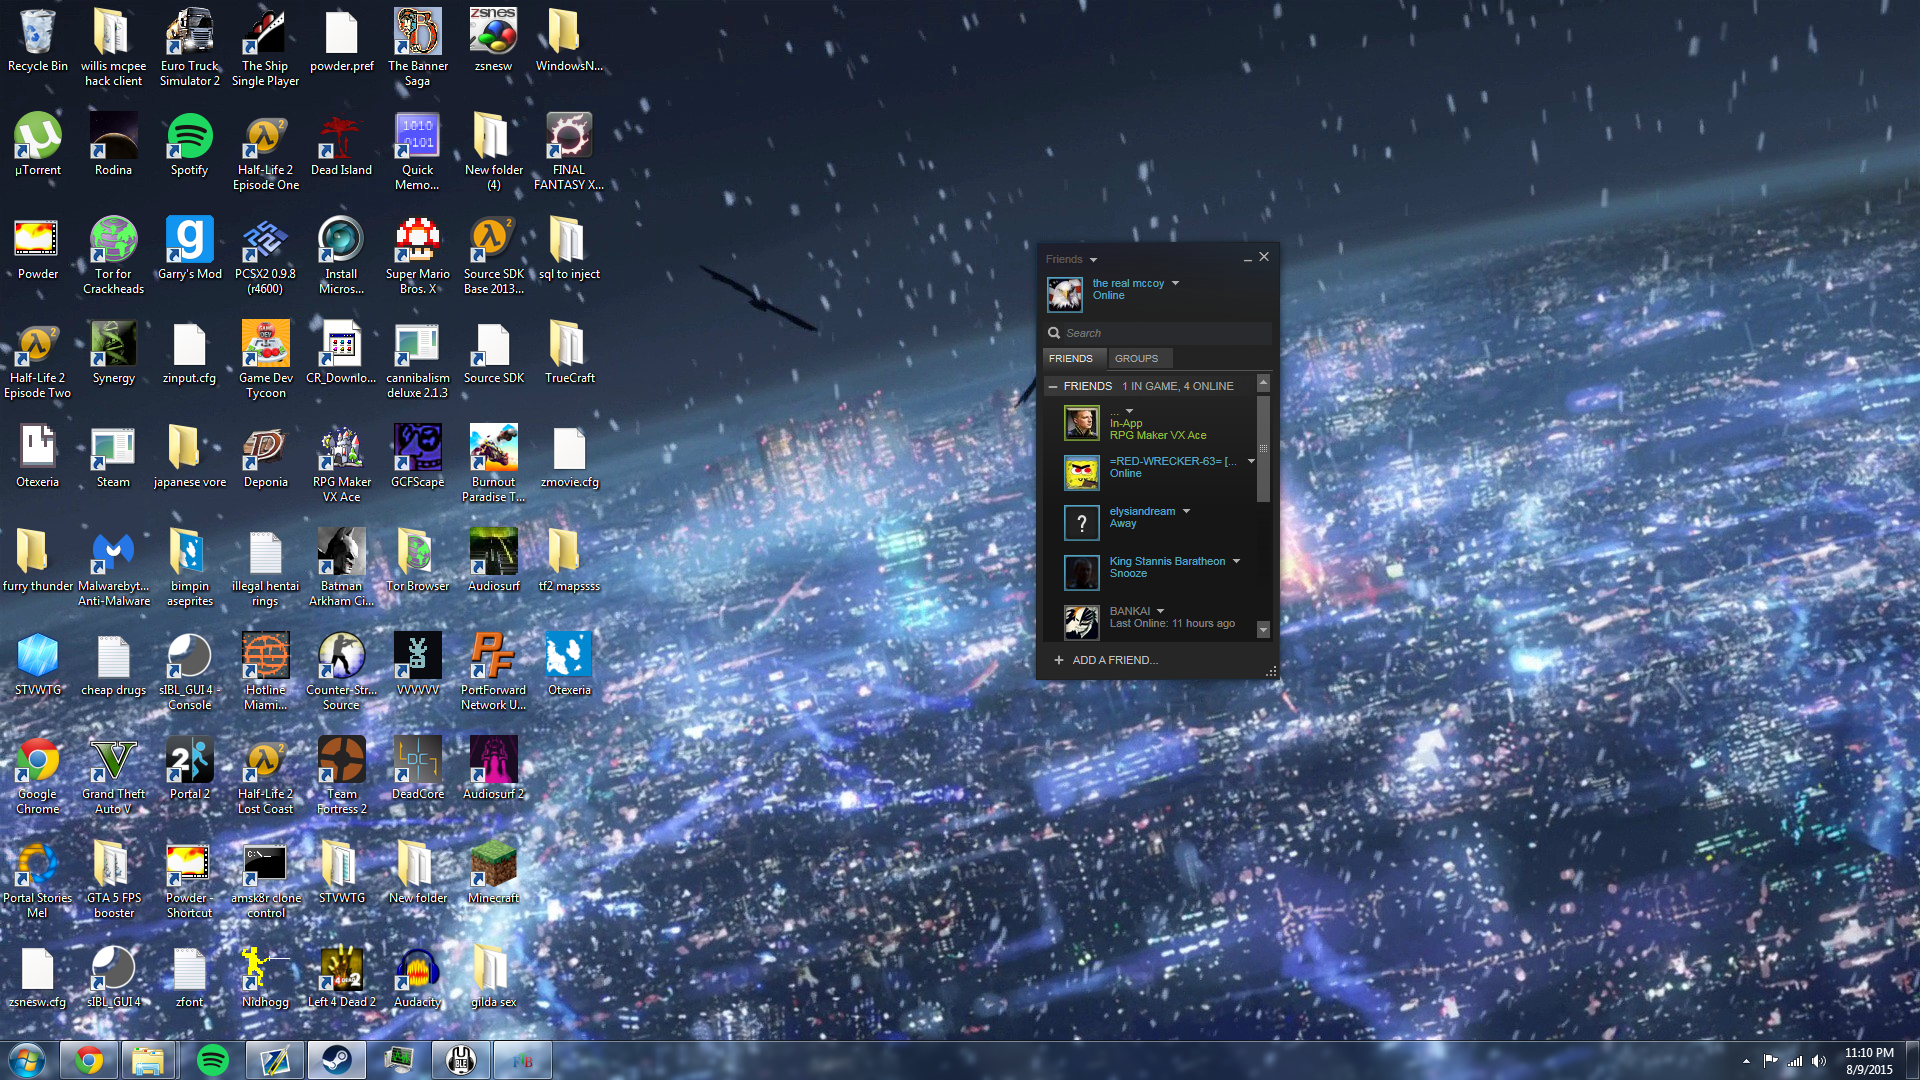 post your desktop RIGHT NOW - Page 2 4cd59107c679d1a2fada338fb9563874